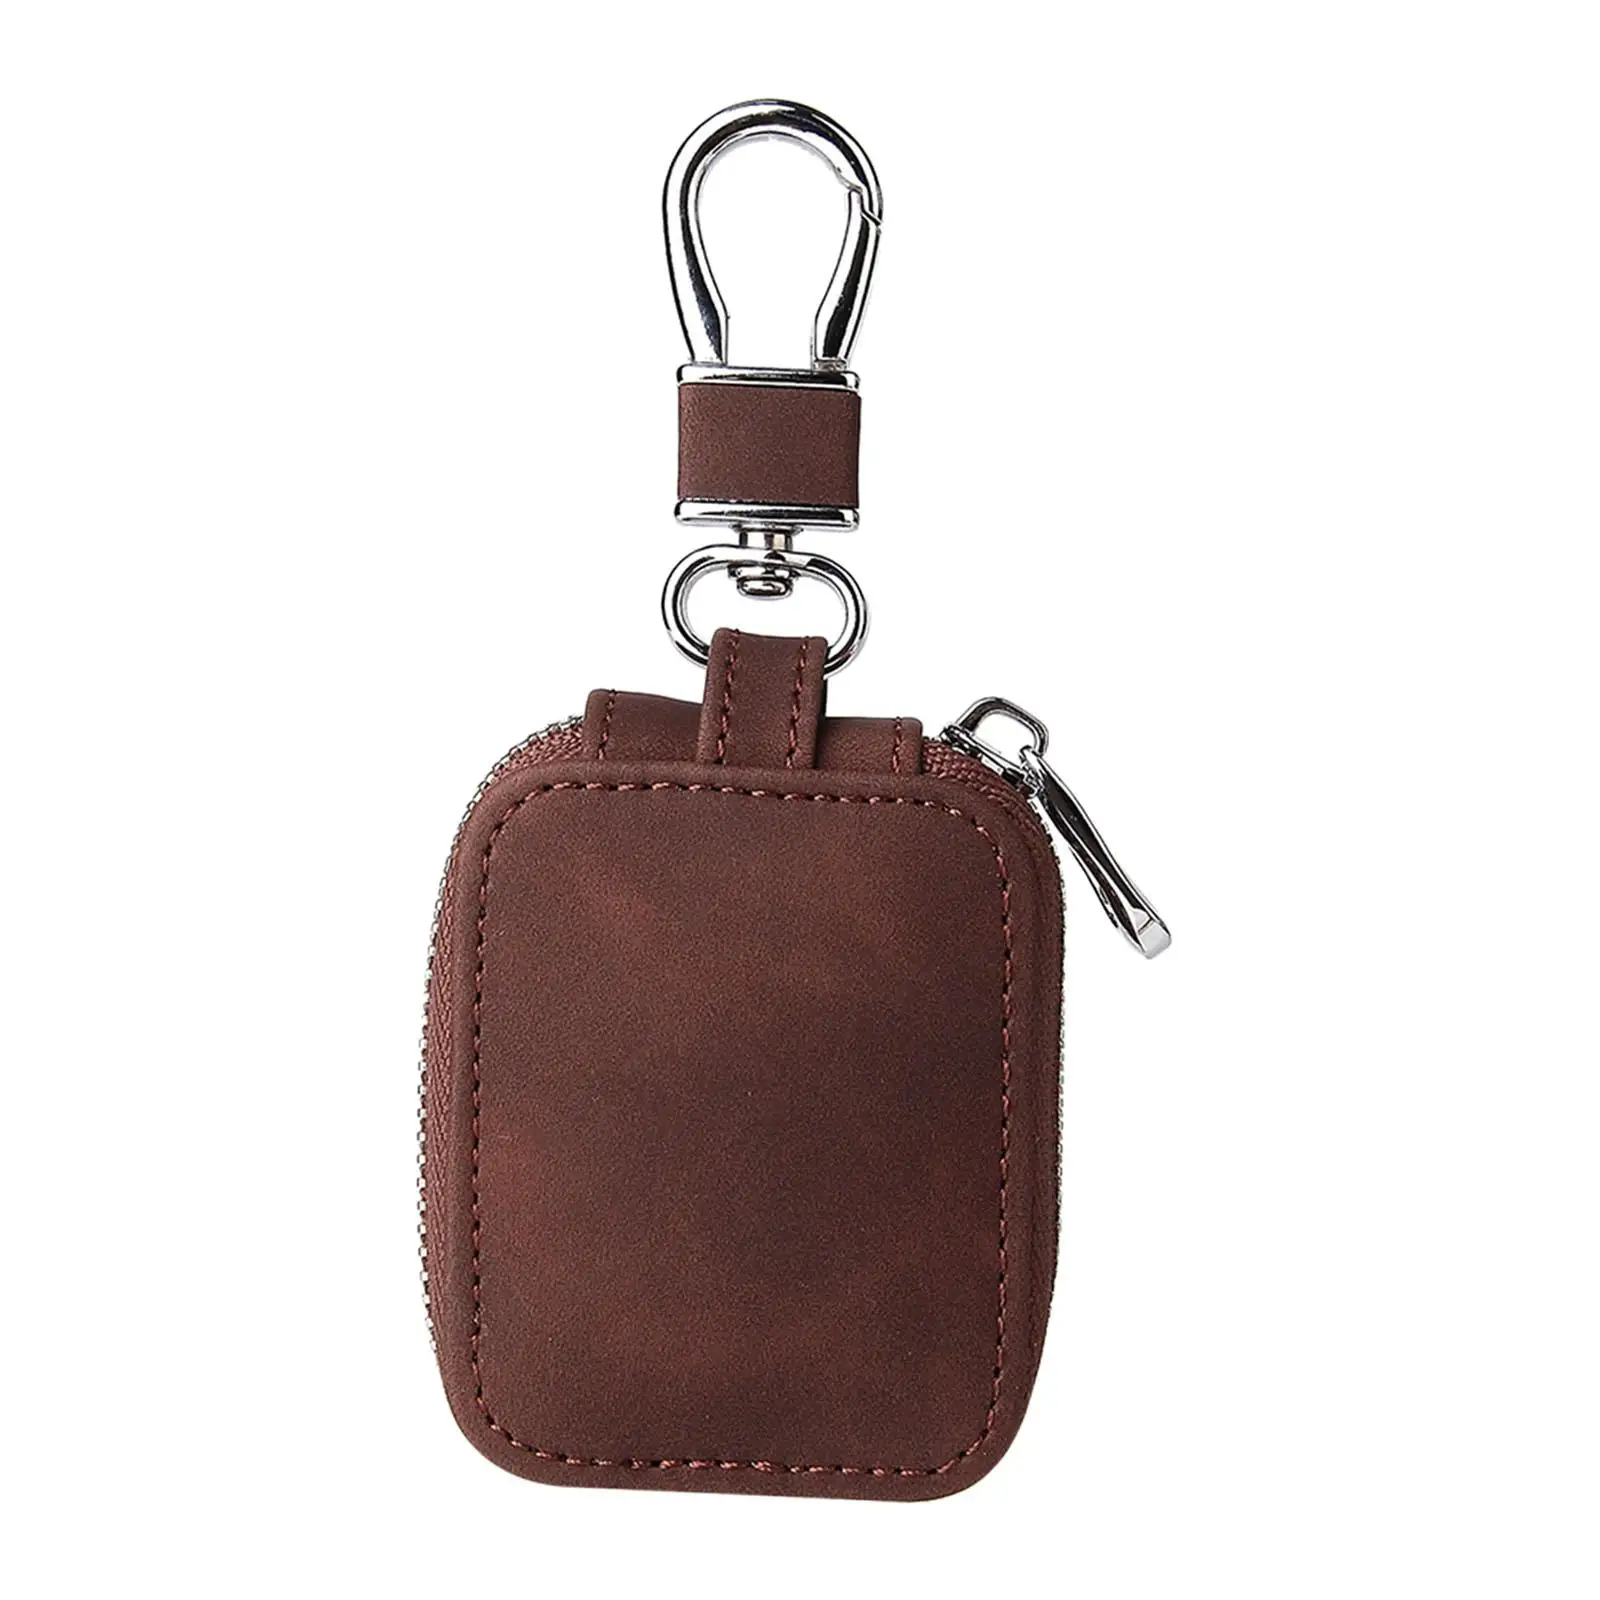 Earphone Case Shockproof with Keychain Retro Accs Portable Carrying Bag Pocket Artificial Leather Storage Bag Earbuds Case